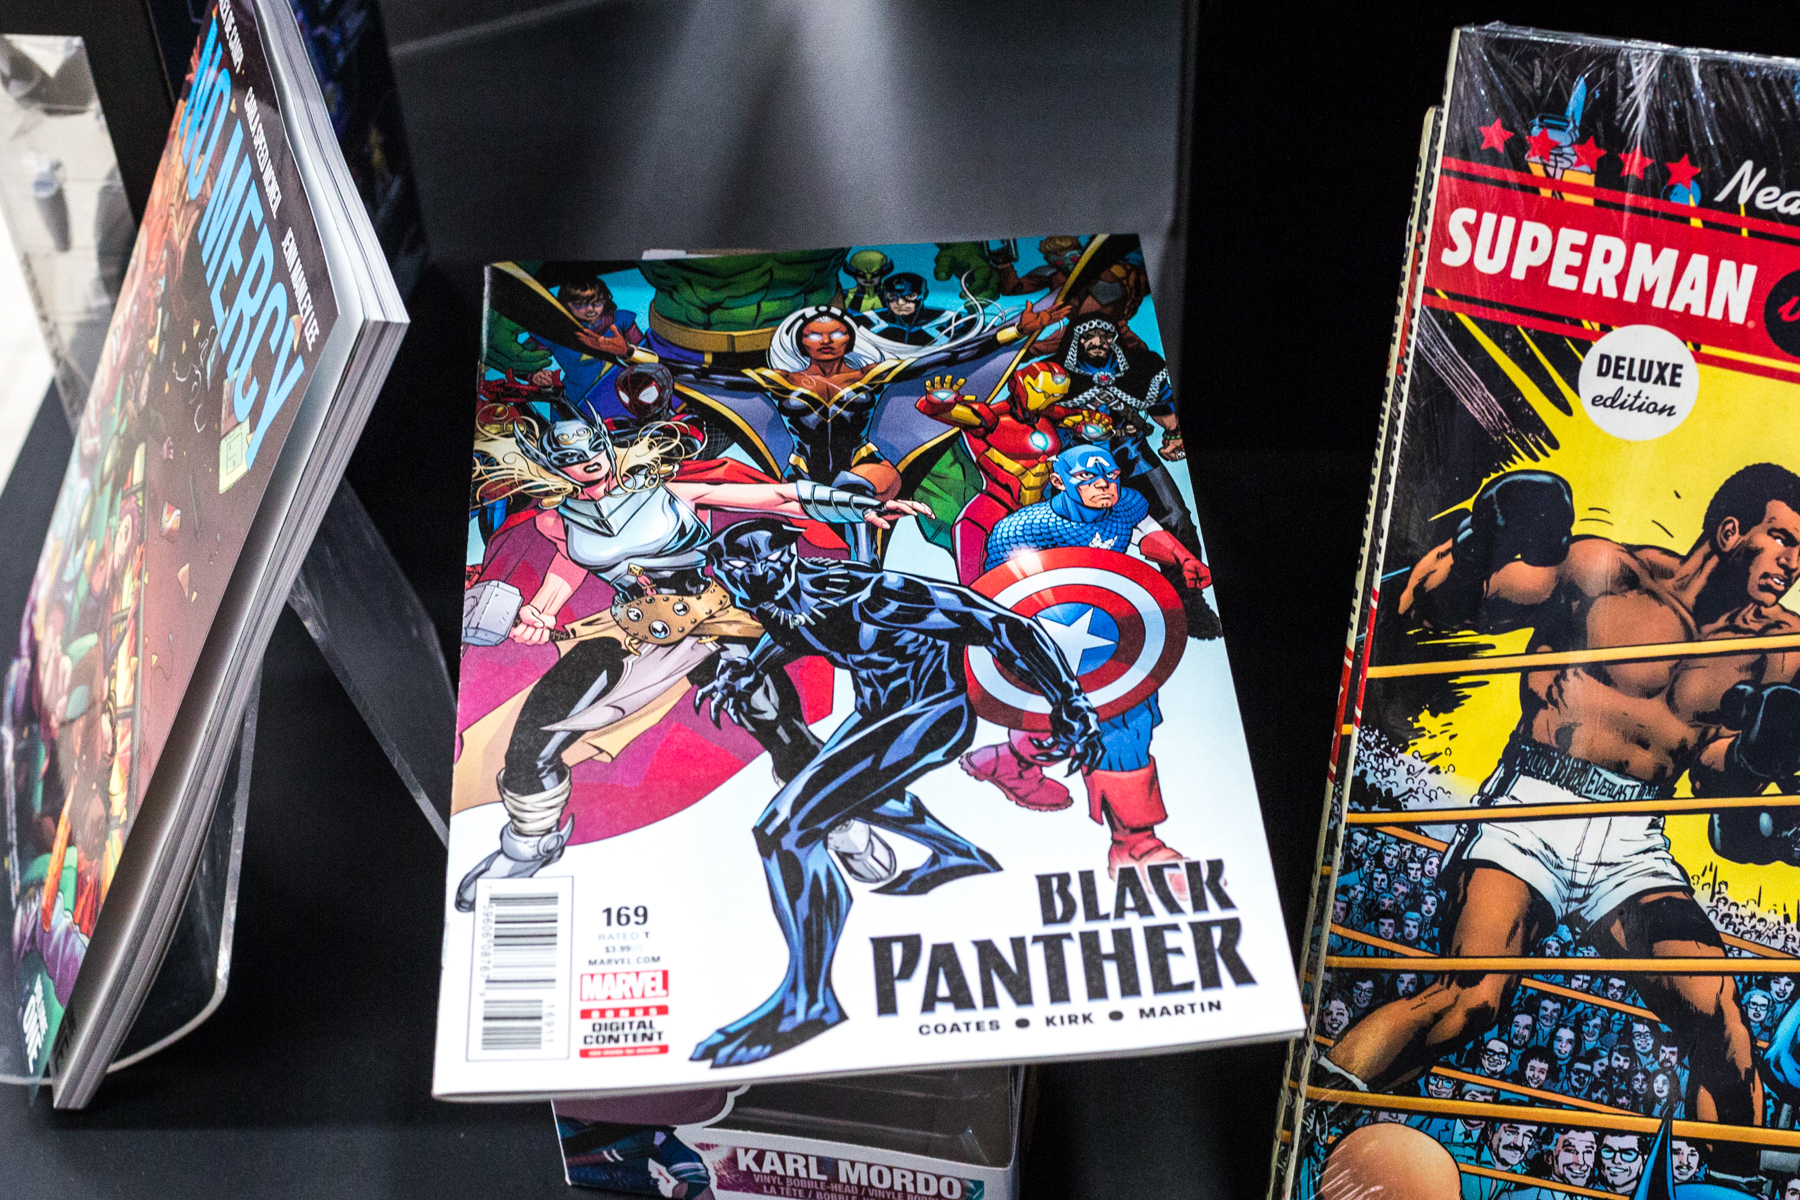  The graphic novel Black Panther is prominently on display at HI DE HO comics in Santa Monica, CA on Thursday March 1 2018. (Photo by Ruth Iorio) 